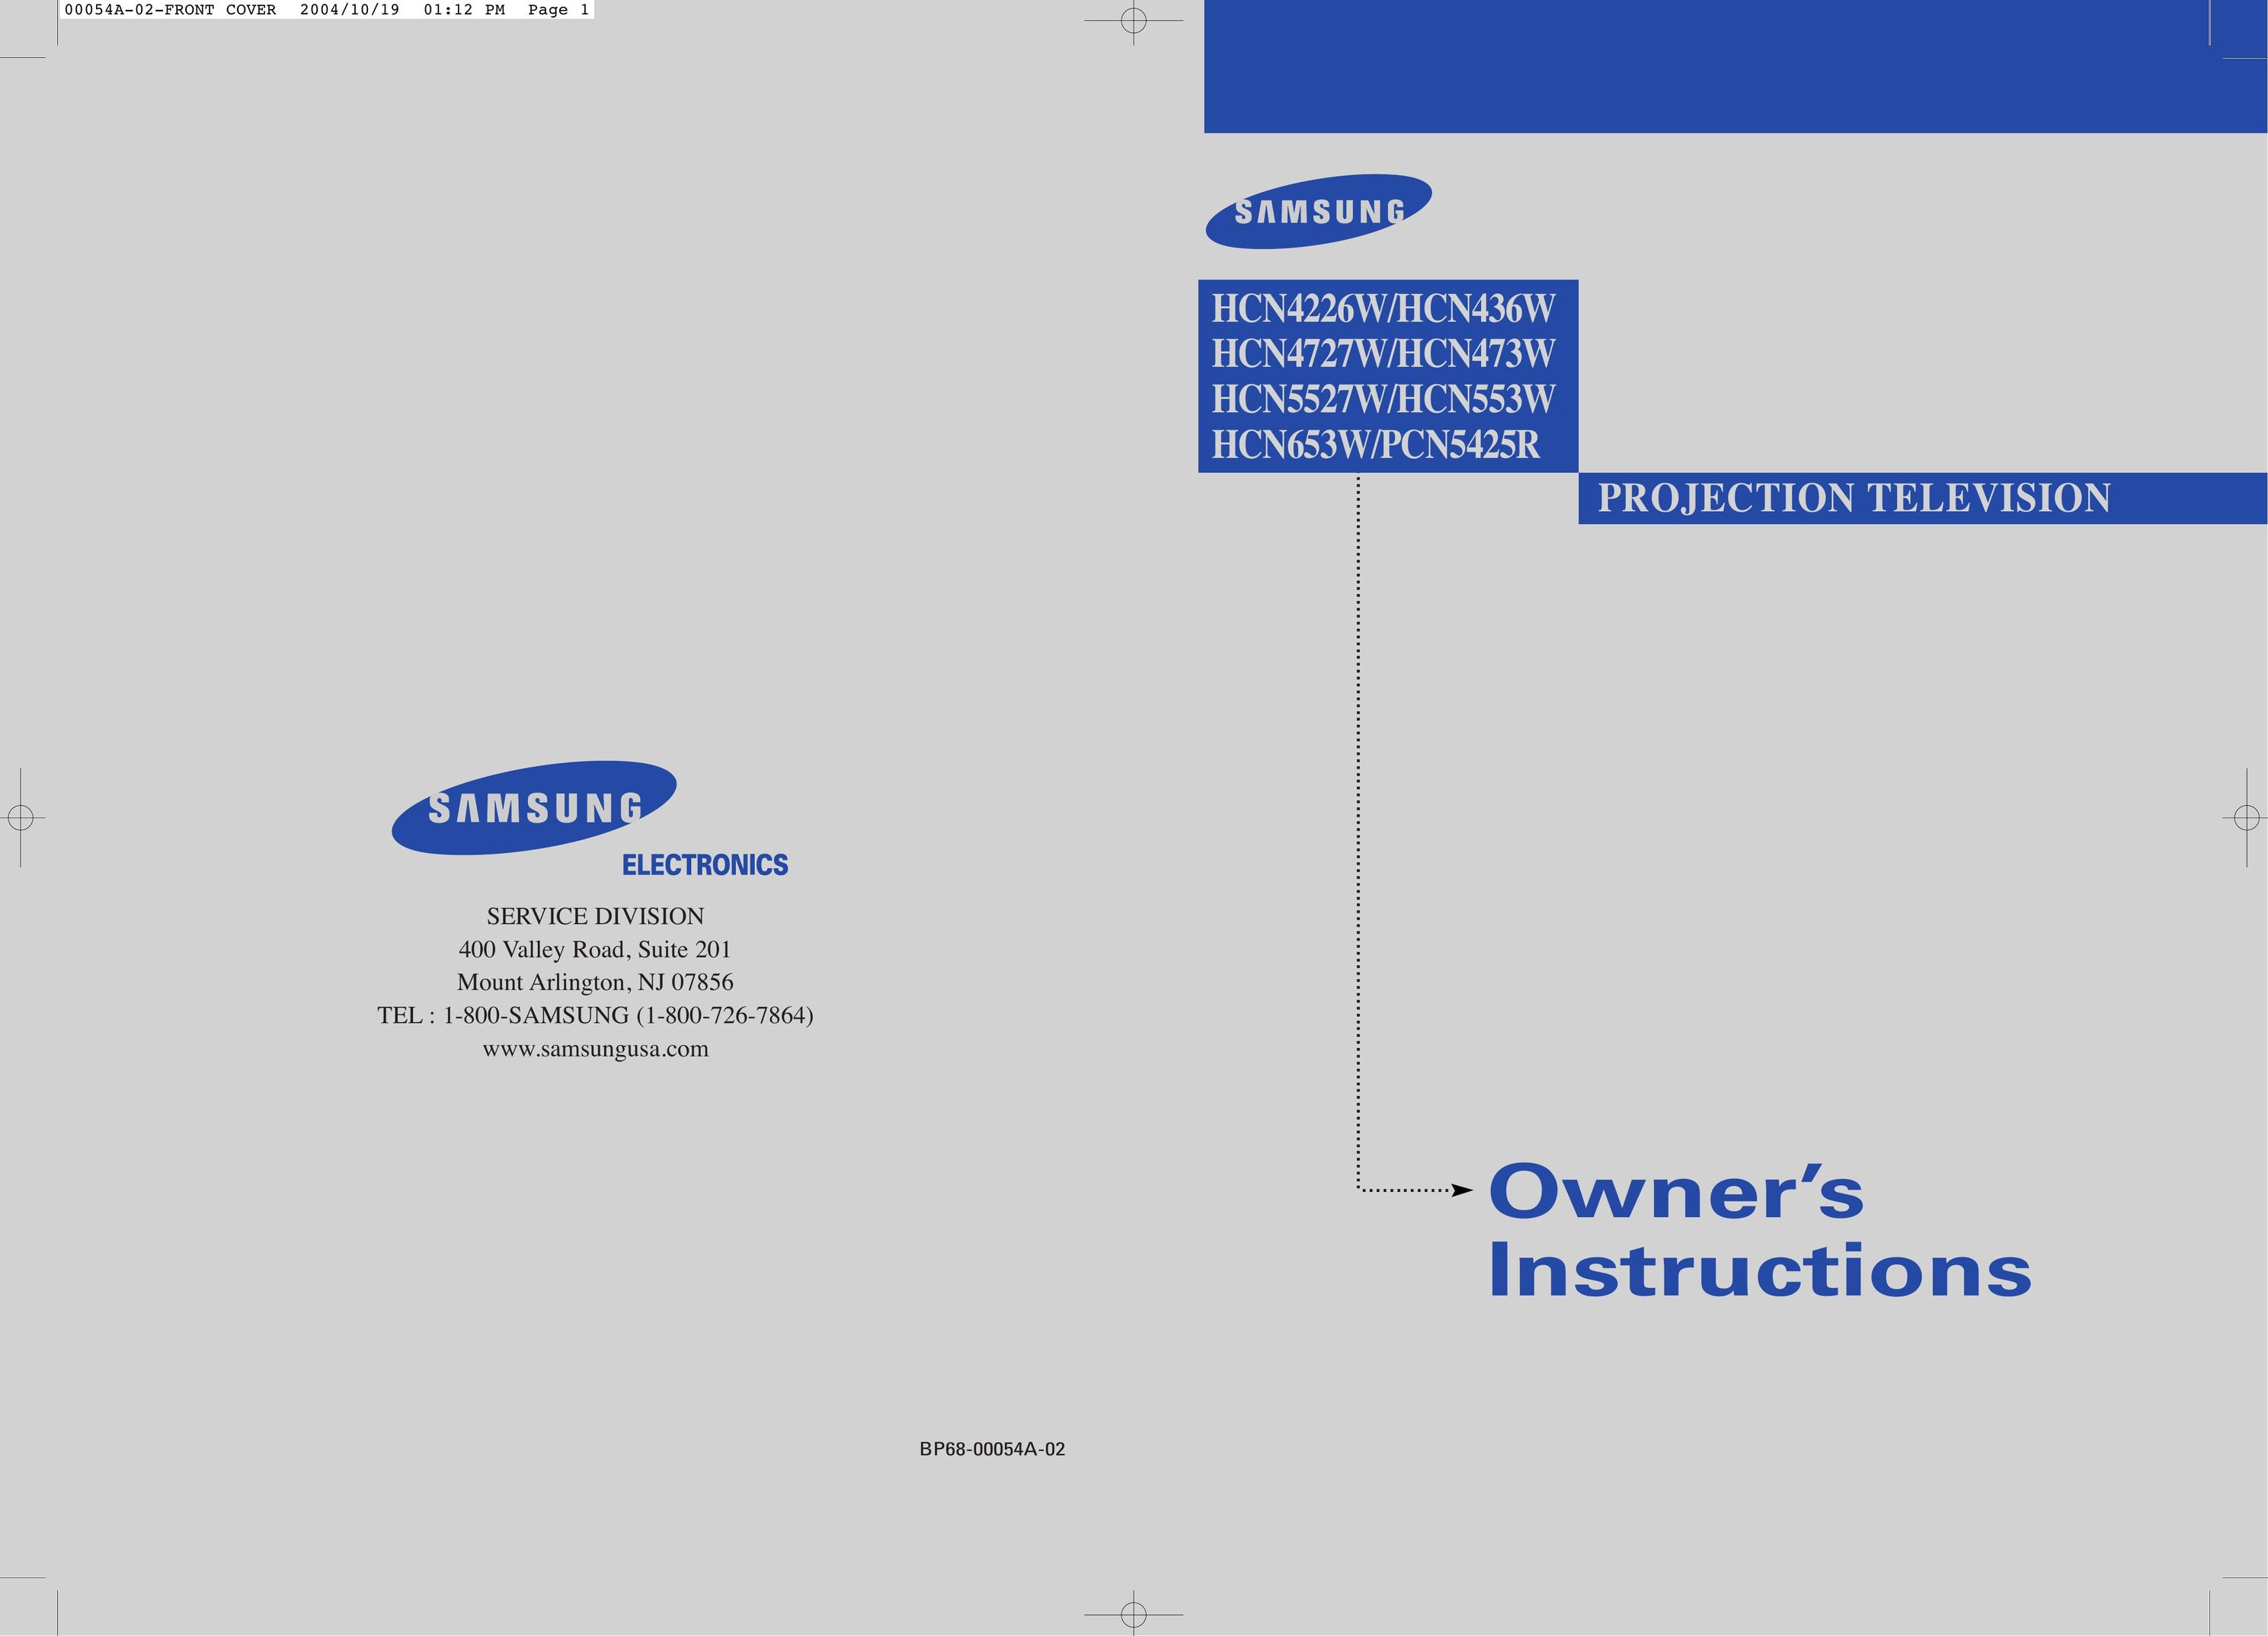 Samsung HCN4226W Projection Television User Manual